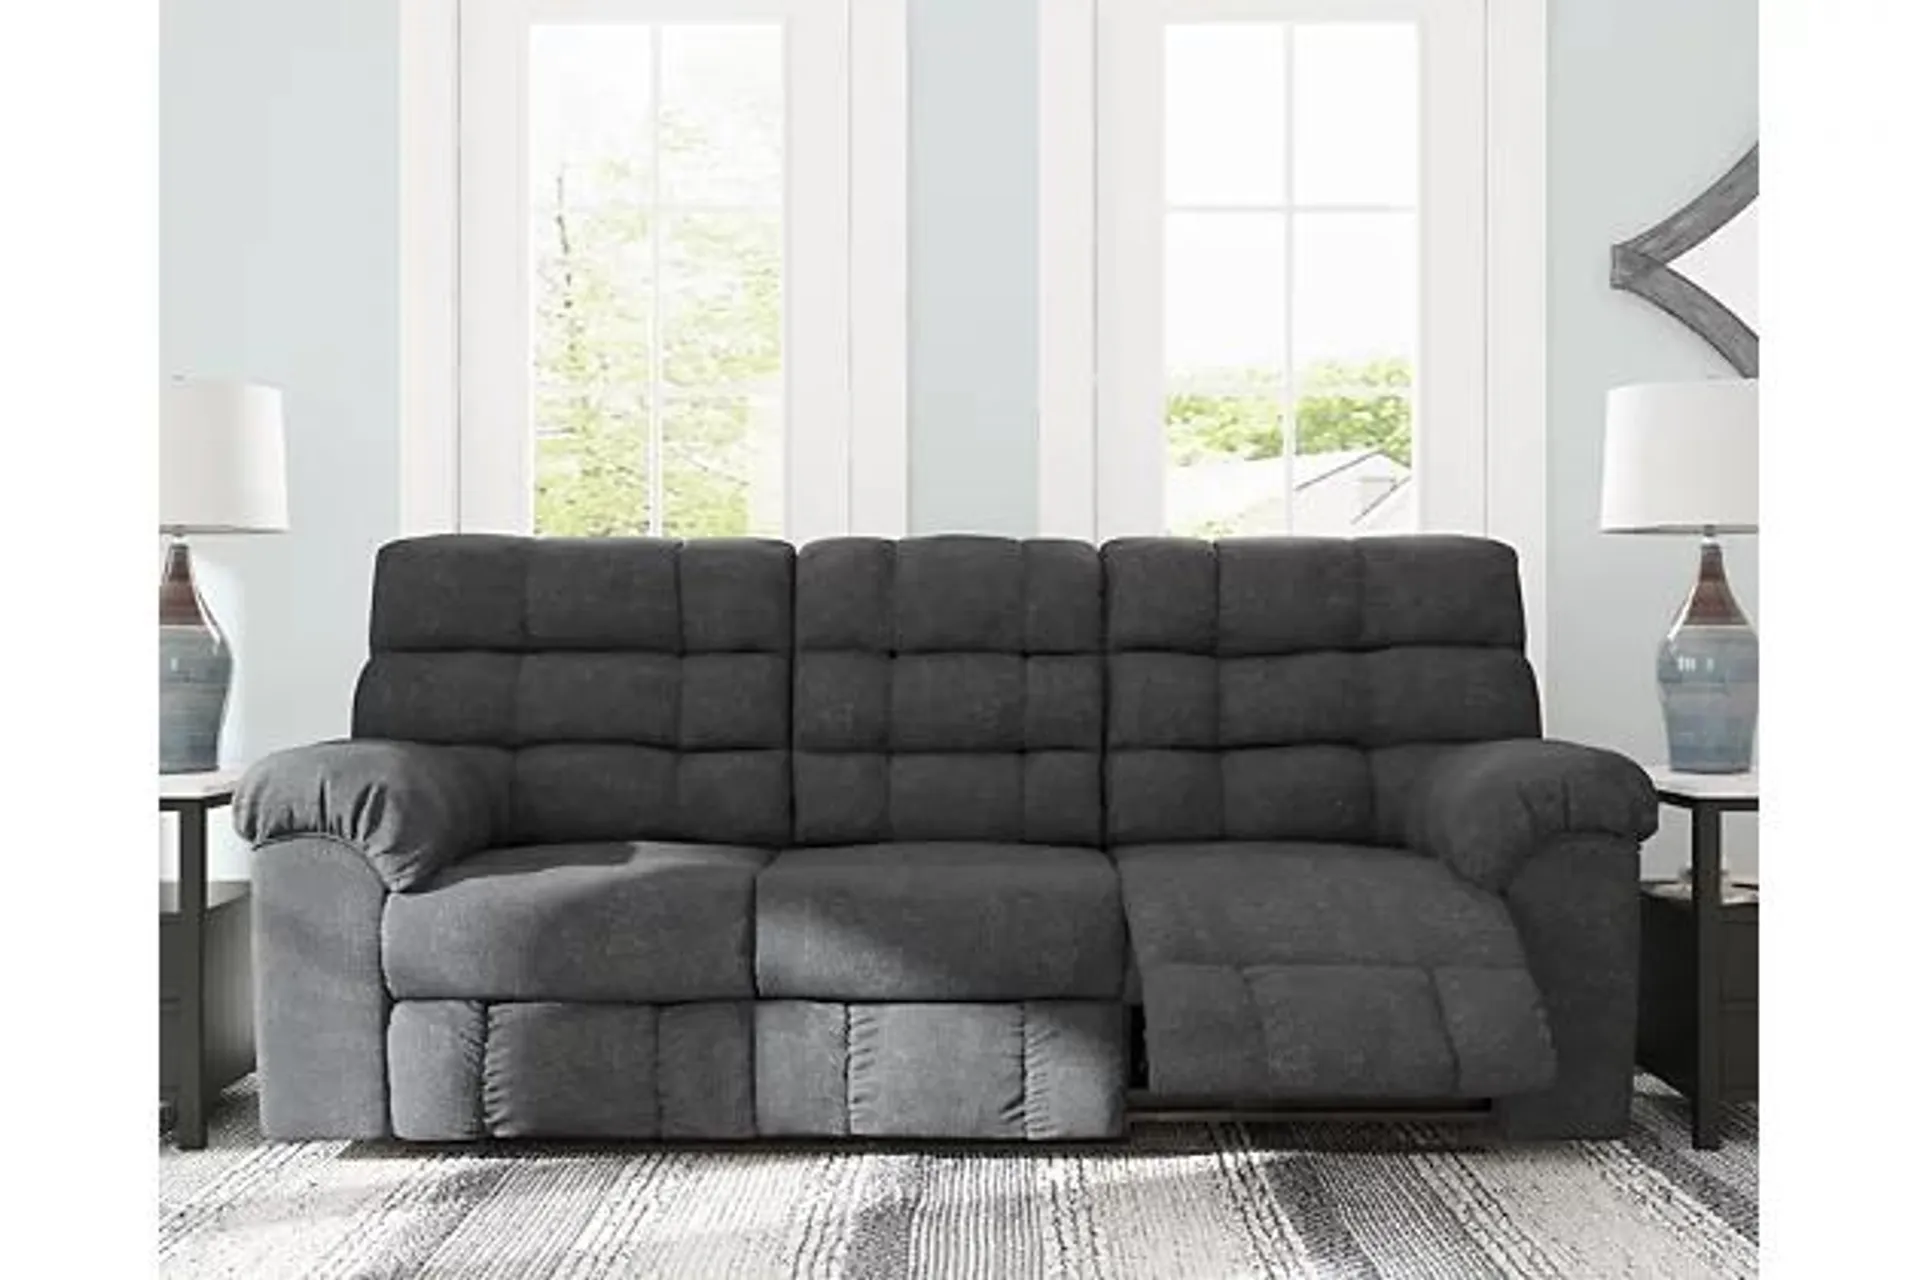 Wilhurst Manual Reclining Sofa with Drop Down Table